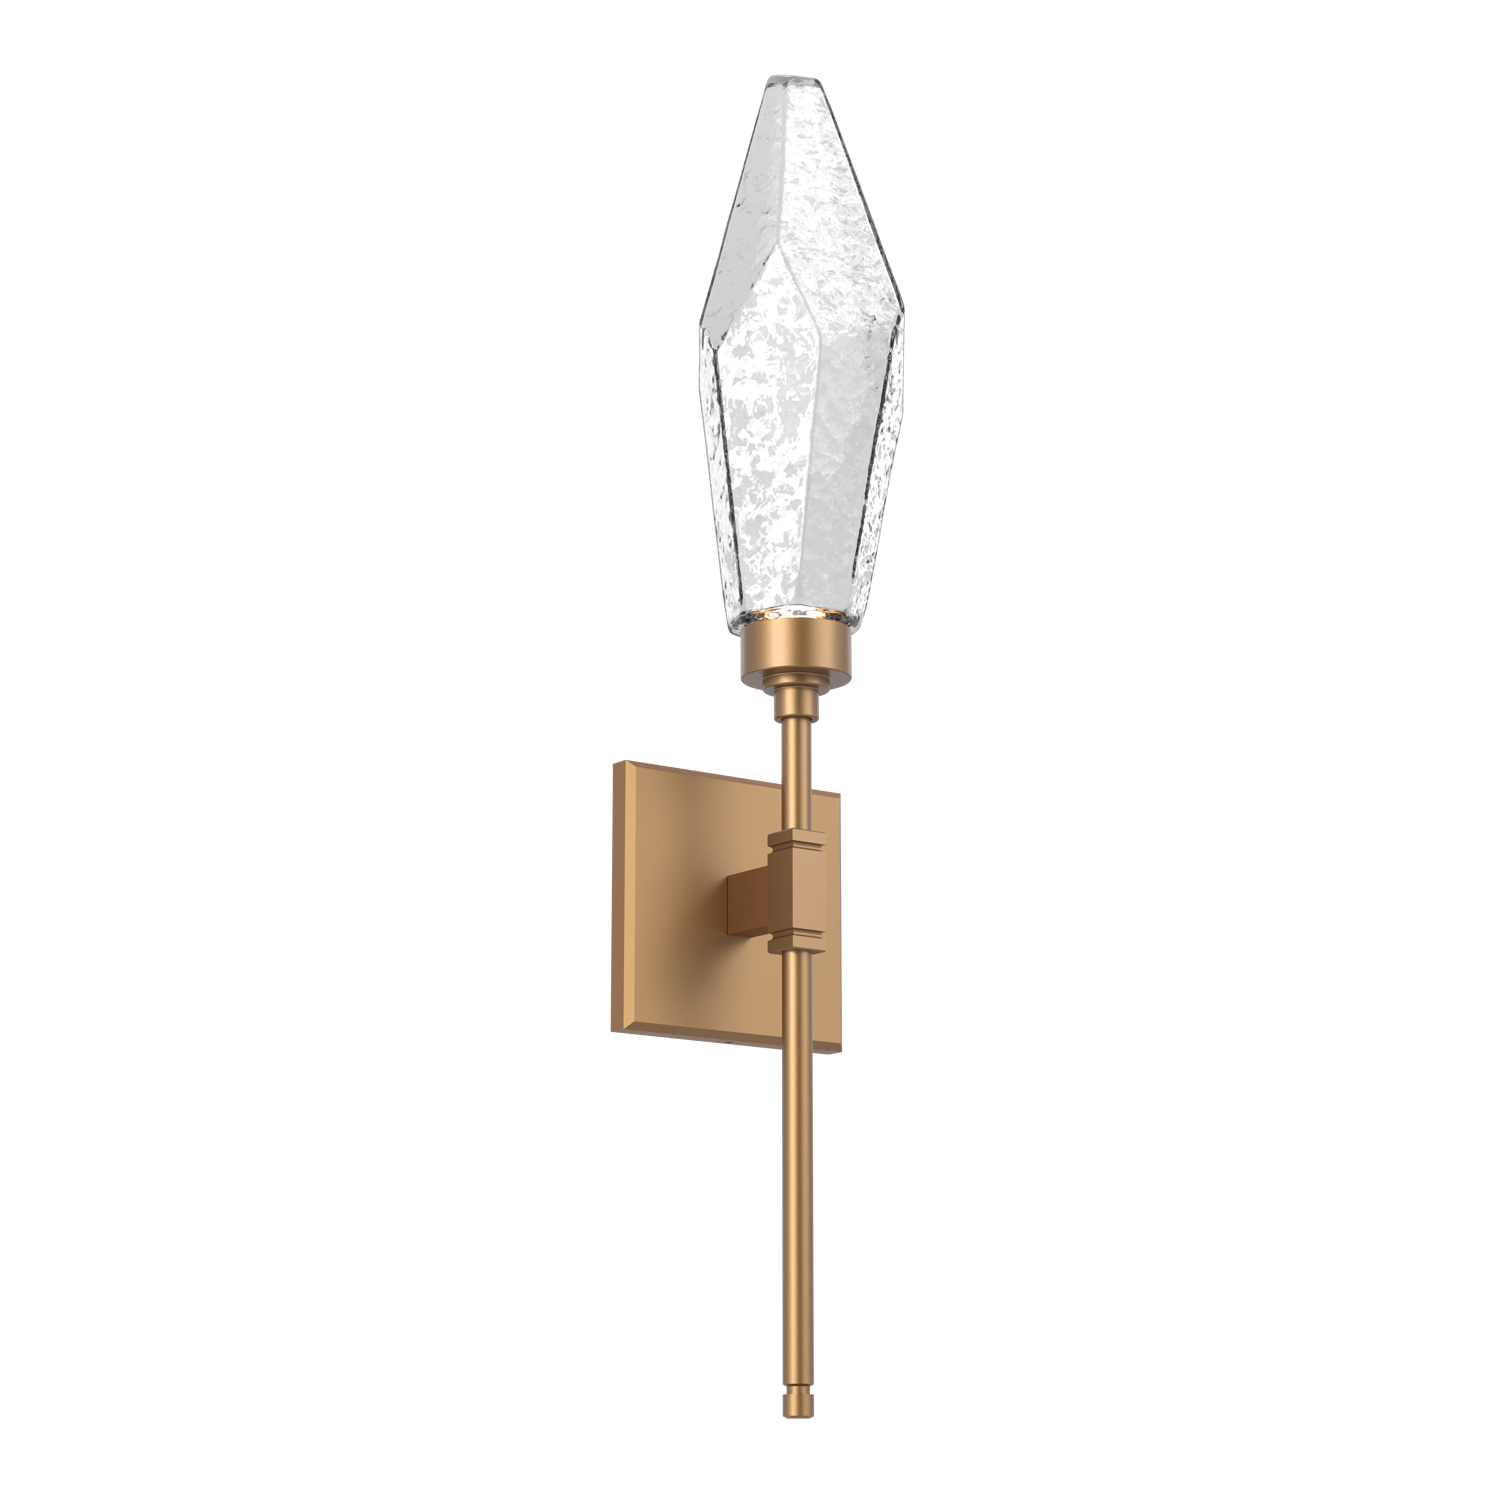 IDB0050-04-NB-CC-Hammerton-Studio-Rock-Crystal-ada-certified-belvedere-wall-sconce-with-novel-brass-finish-and-clear-glass-shades-and-LED-lamping